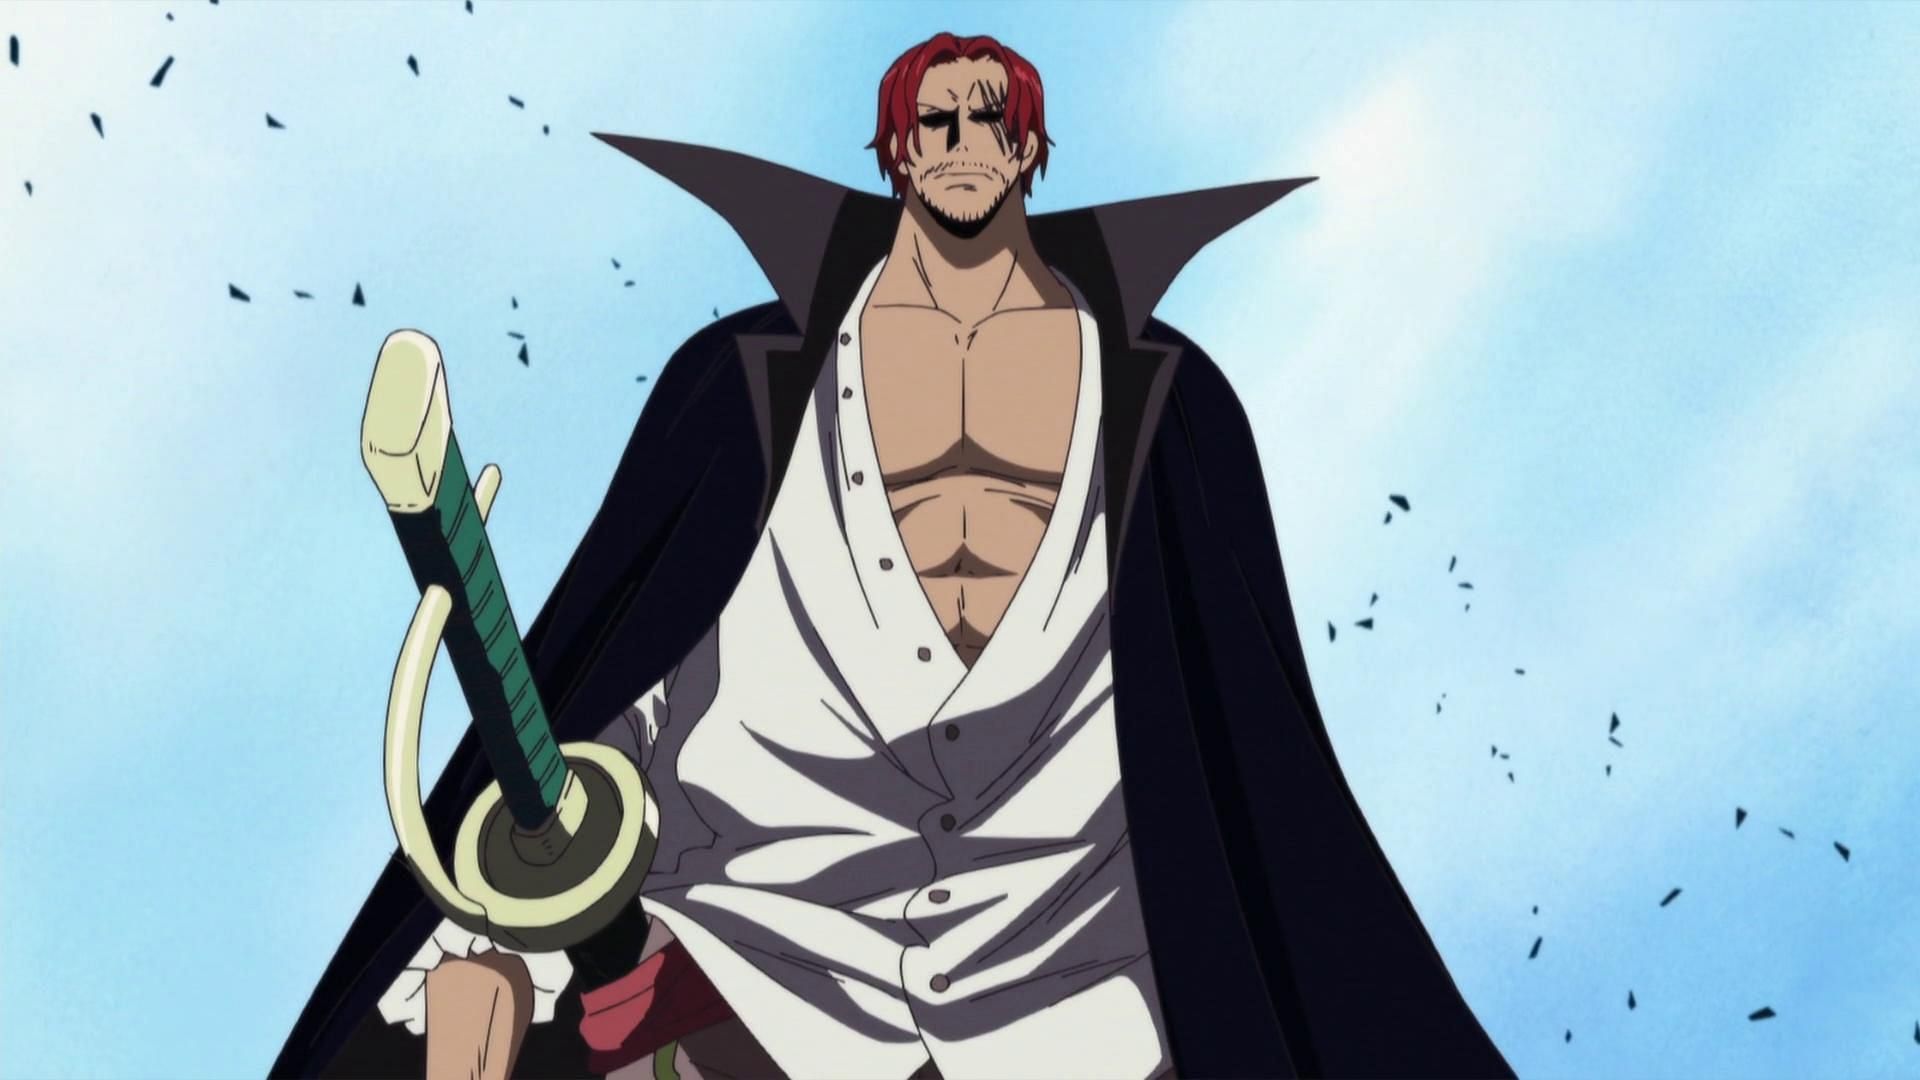 Shanks with his typical posture, clothing, and sword (Image via Toei Animation, One Piece)